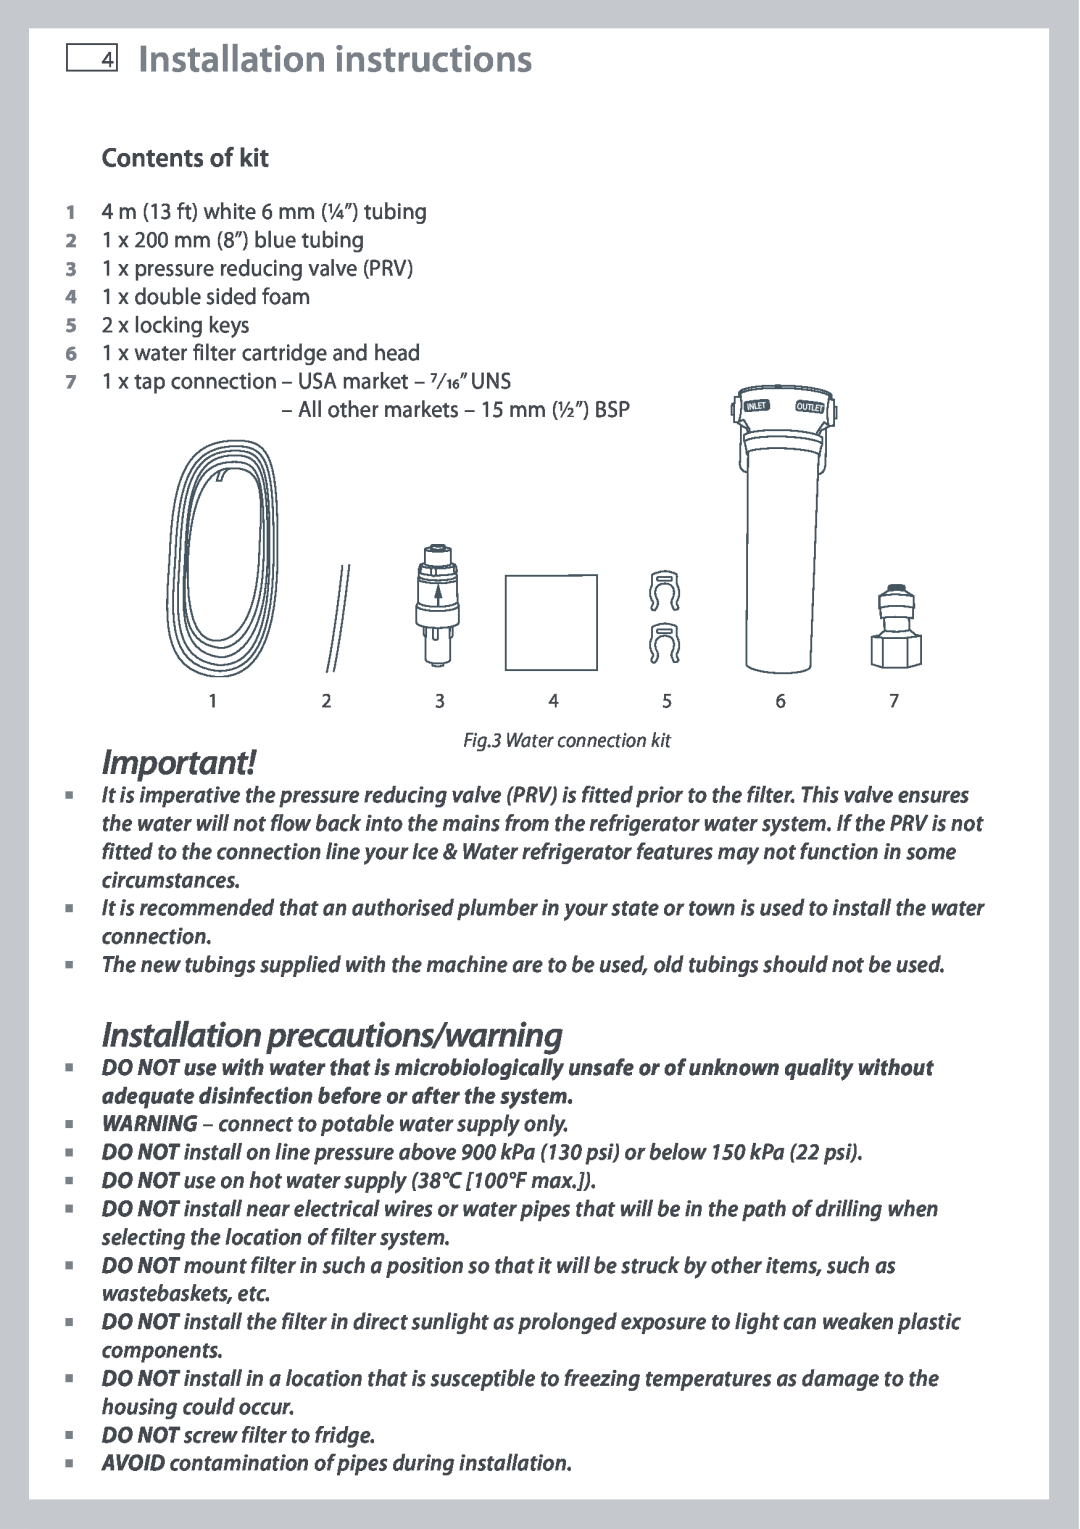 Fisher & Paykel E442B, E402B Installation instructions, Installation precautions/warning, Contents of kit 